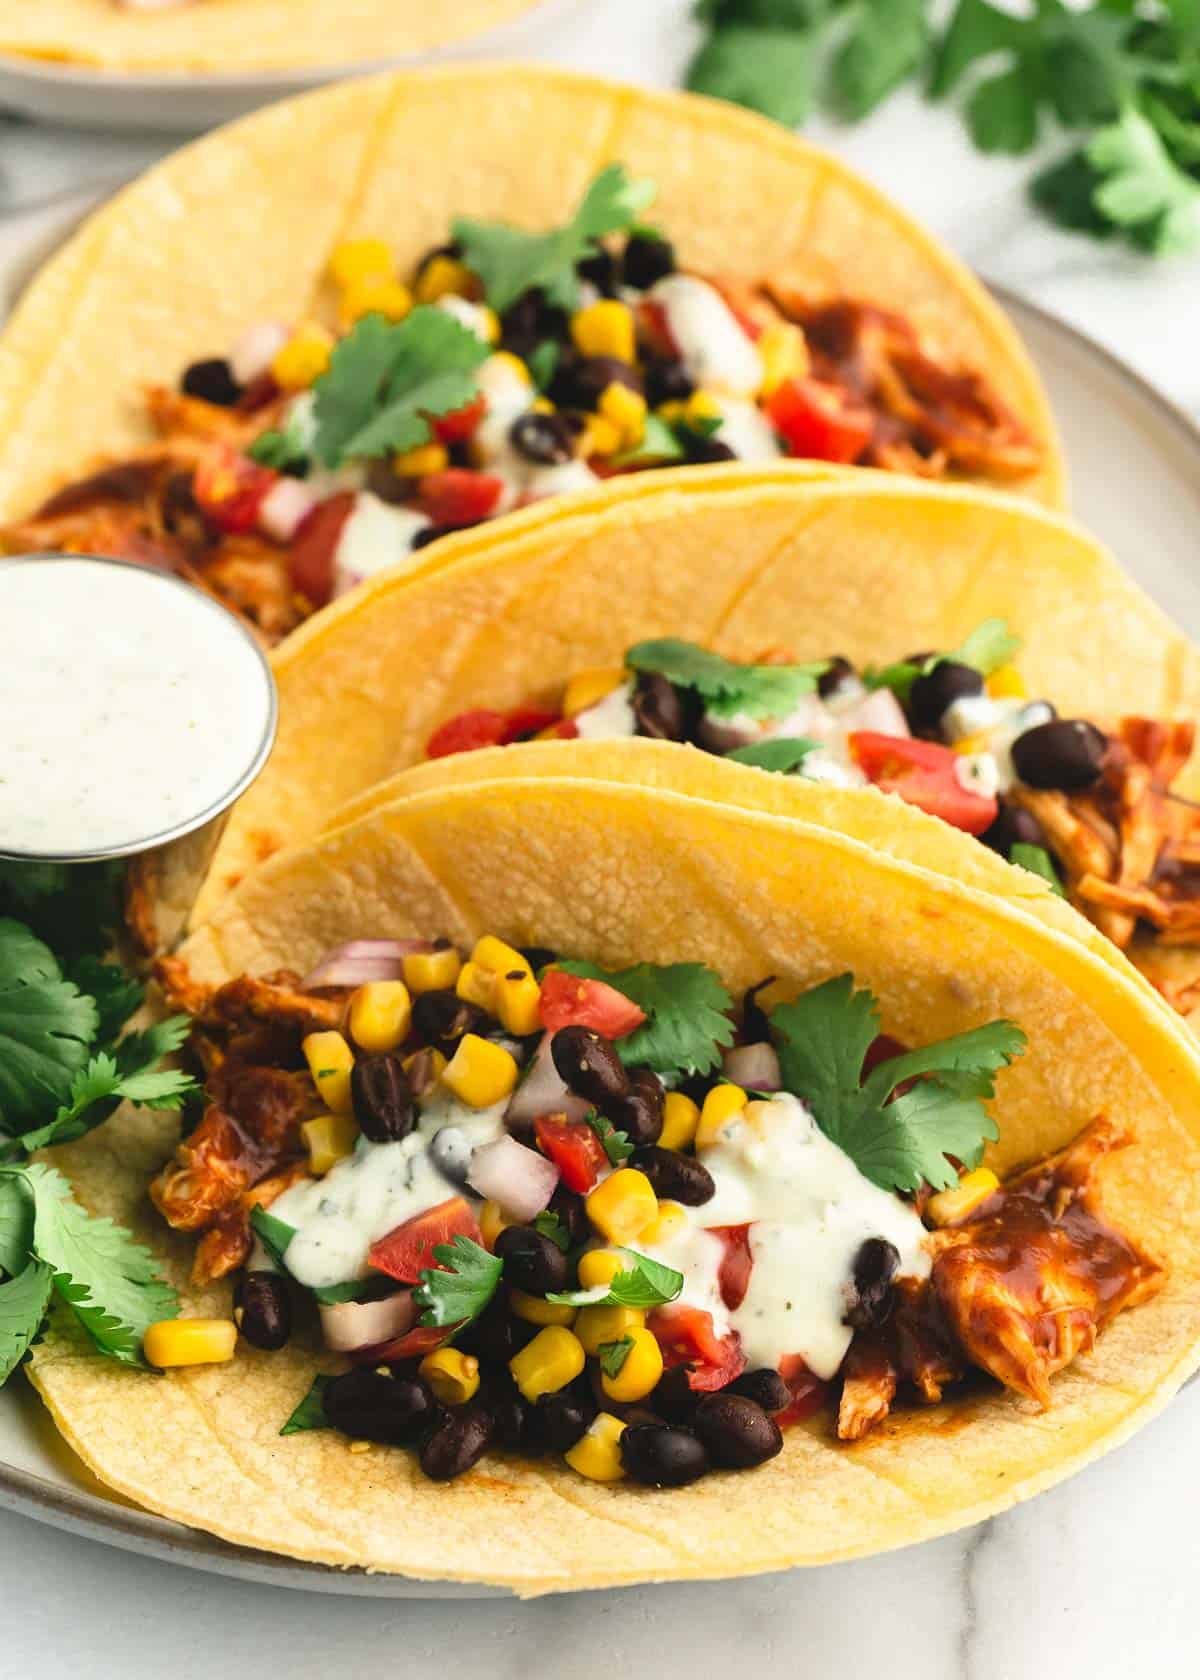 Bbq chicken tacos on plate.